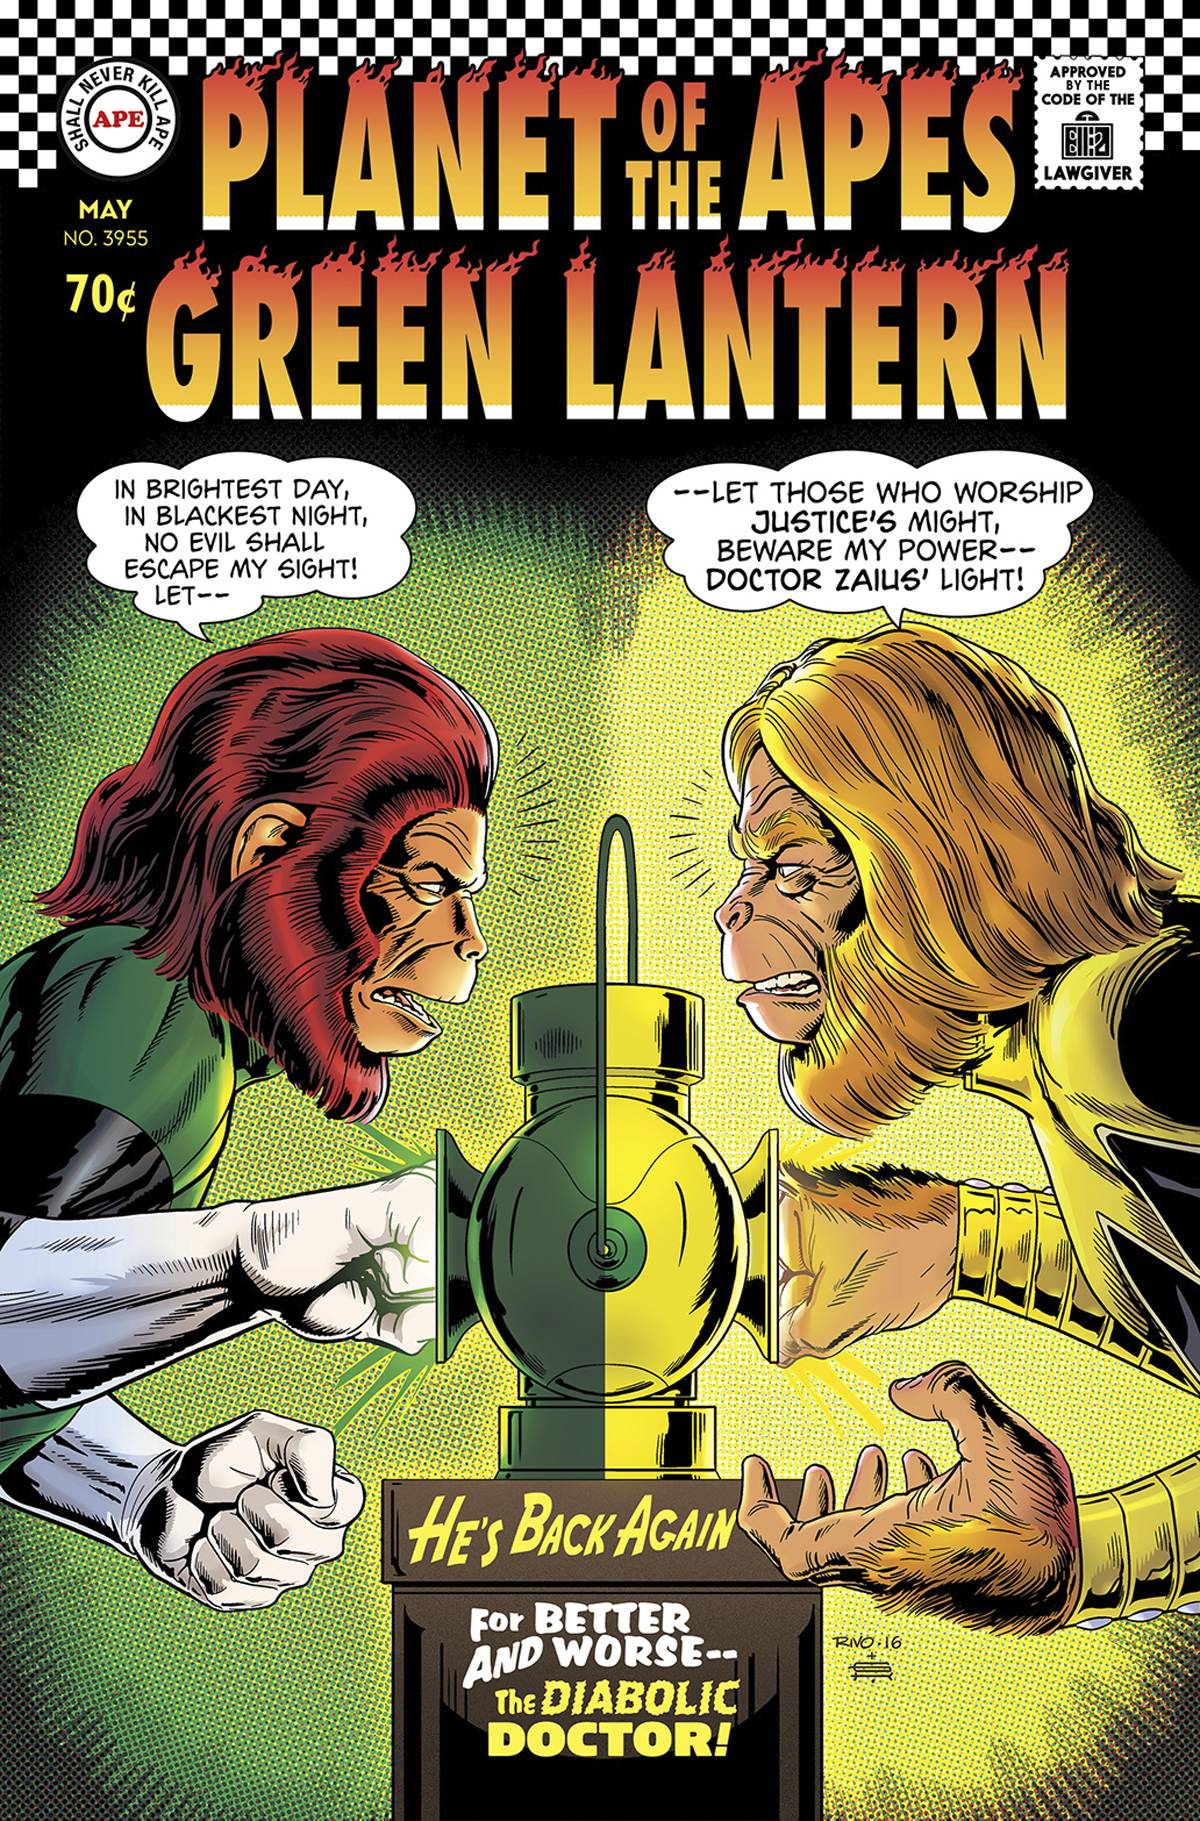 Planet of Apes Green Lantern #2 1 for 10 Incentive Paul Rivoche